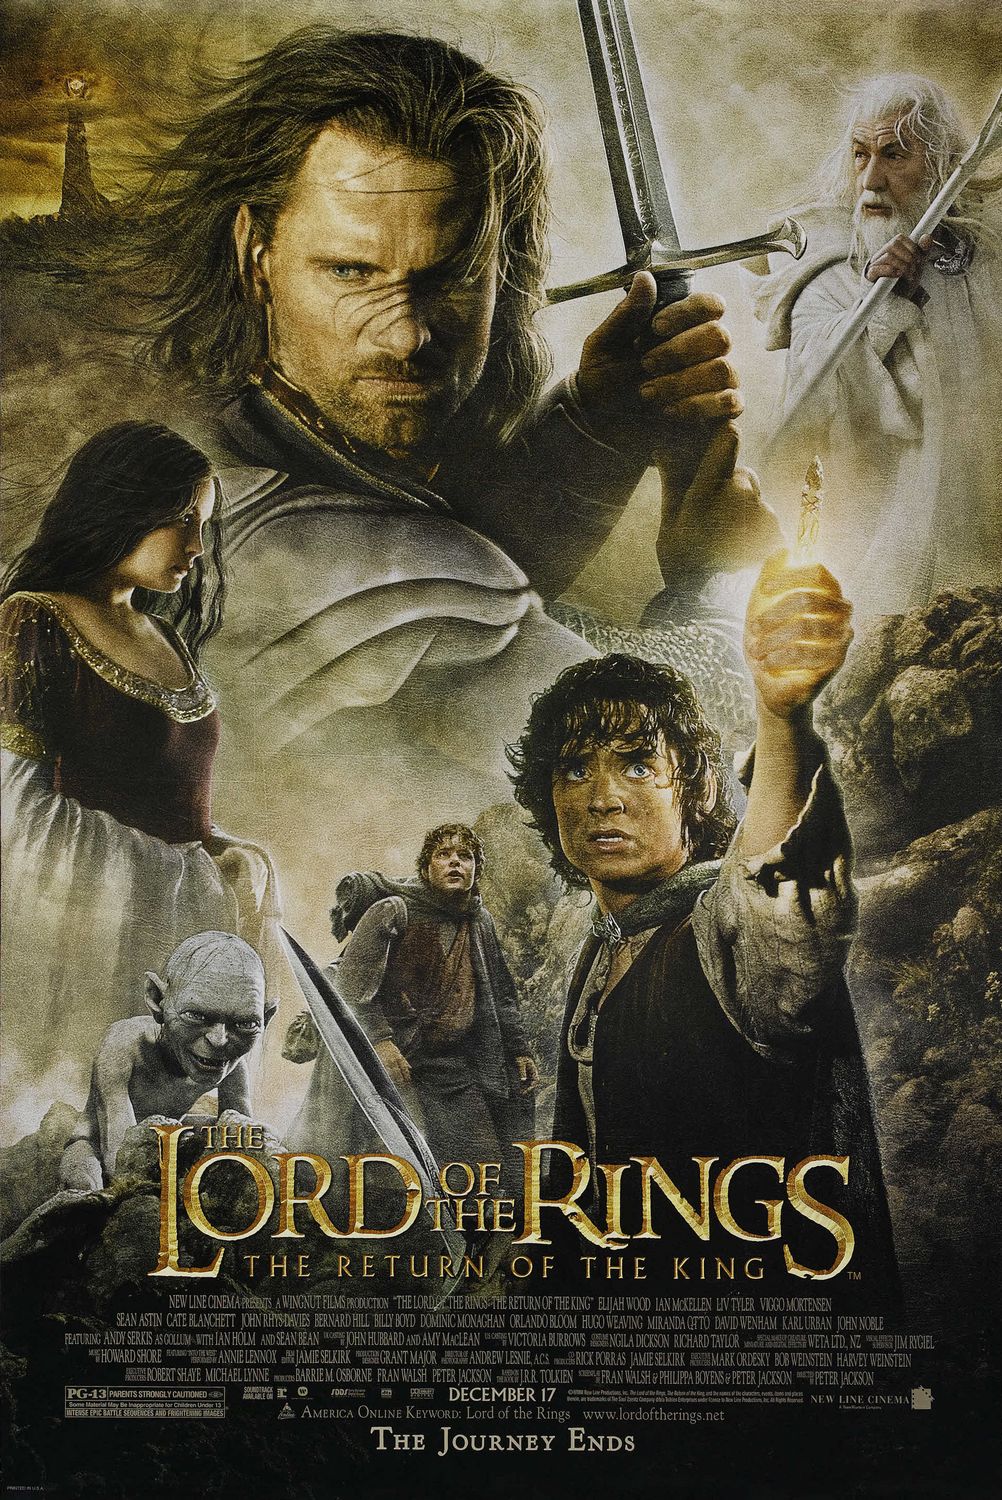 Fellowship of the Ring - Lord of the Rings Movie Poster, lord of the rings  movie - thirstymag.com